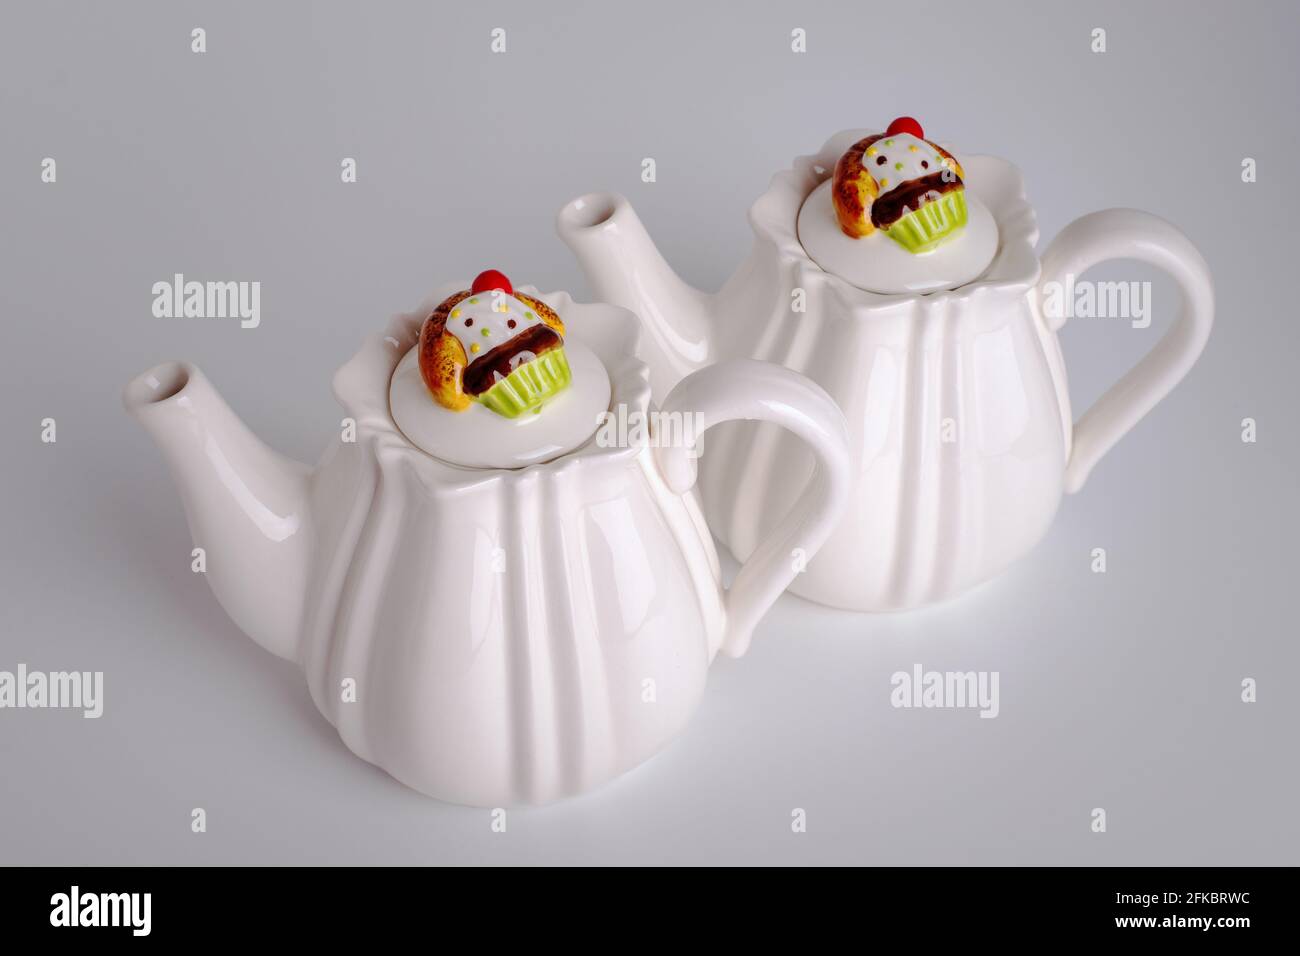 Two white teapots for tea. Dishes for tea drinking. Cupcake on a lid Muffin Stock Photo